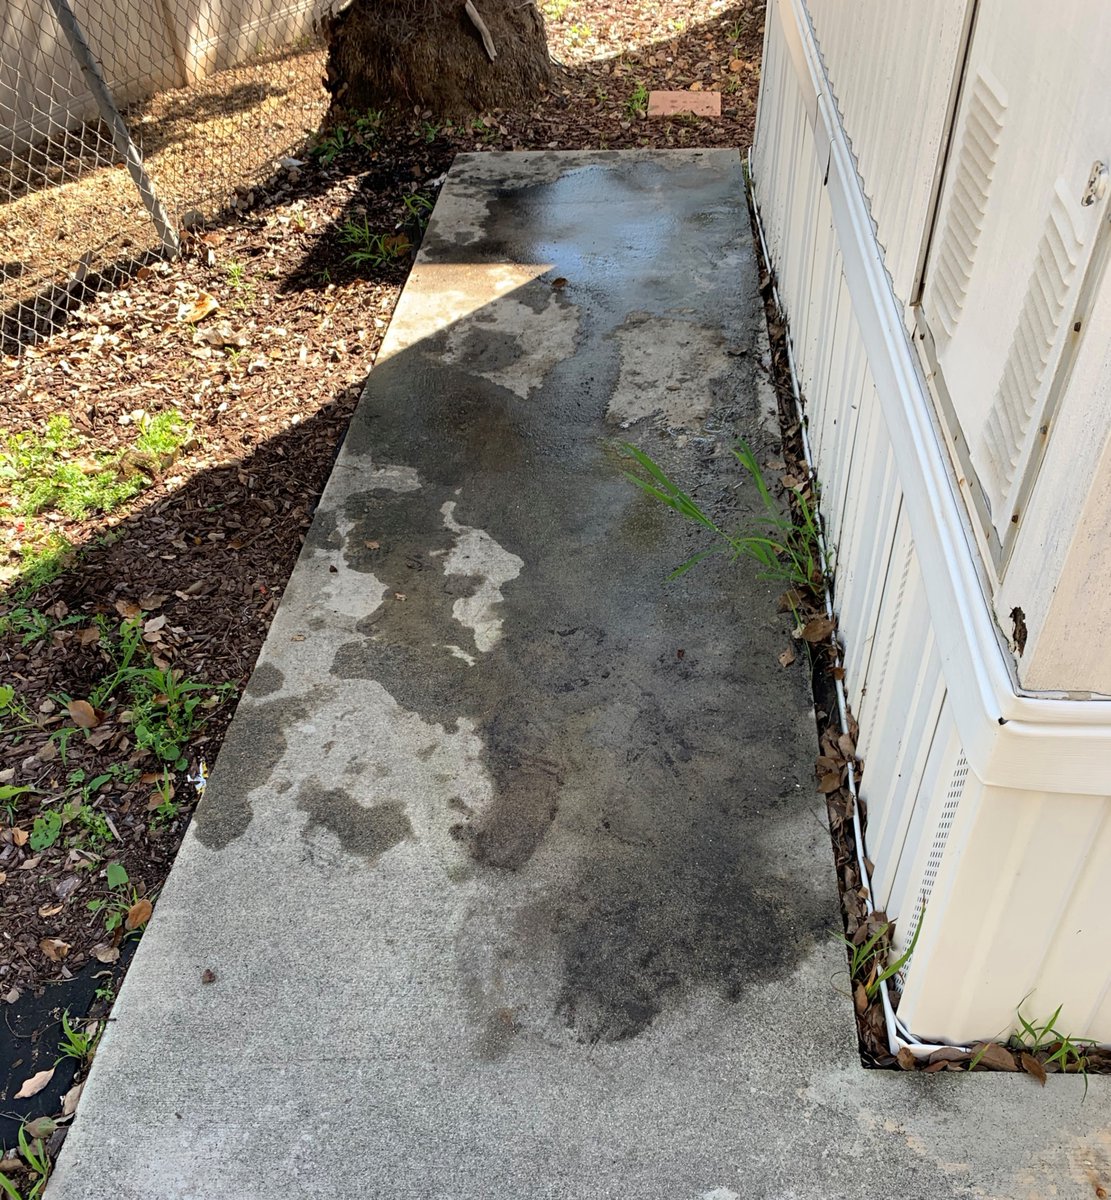 Say goodbye to the junk piles on the side of your house! We offer quick and contactless service. Give us call to complete your cleanup projects: jdognorthsandiego.com | jdog.com

#junkremoval #jdogjunkremoval #beforeandafters #cleanup #sandiego #sandiegocleaning